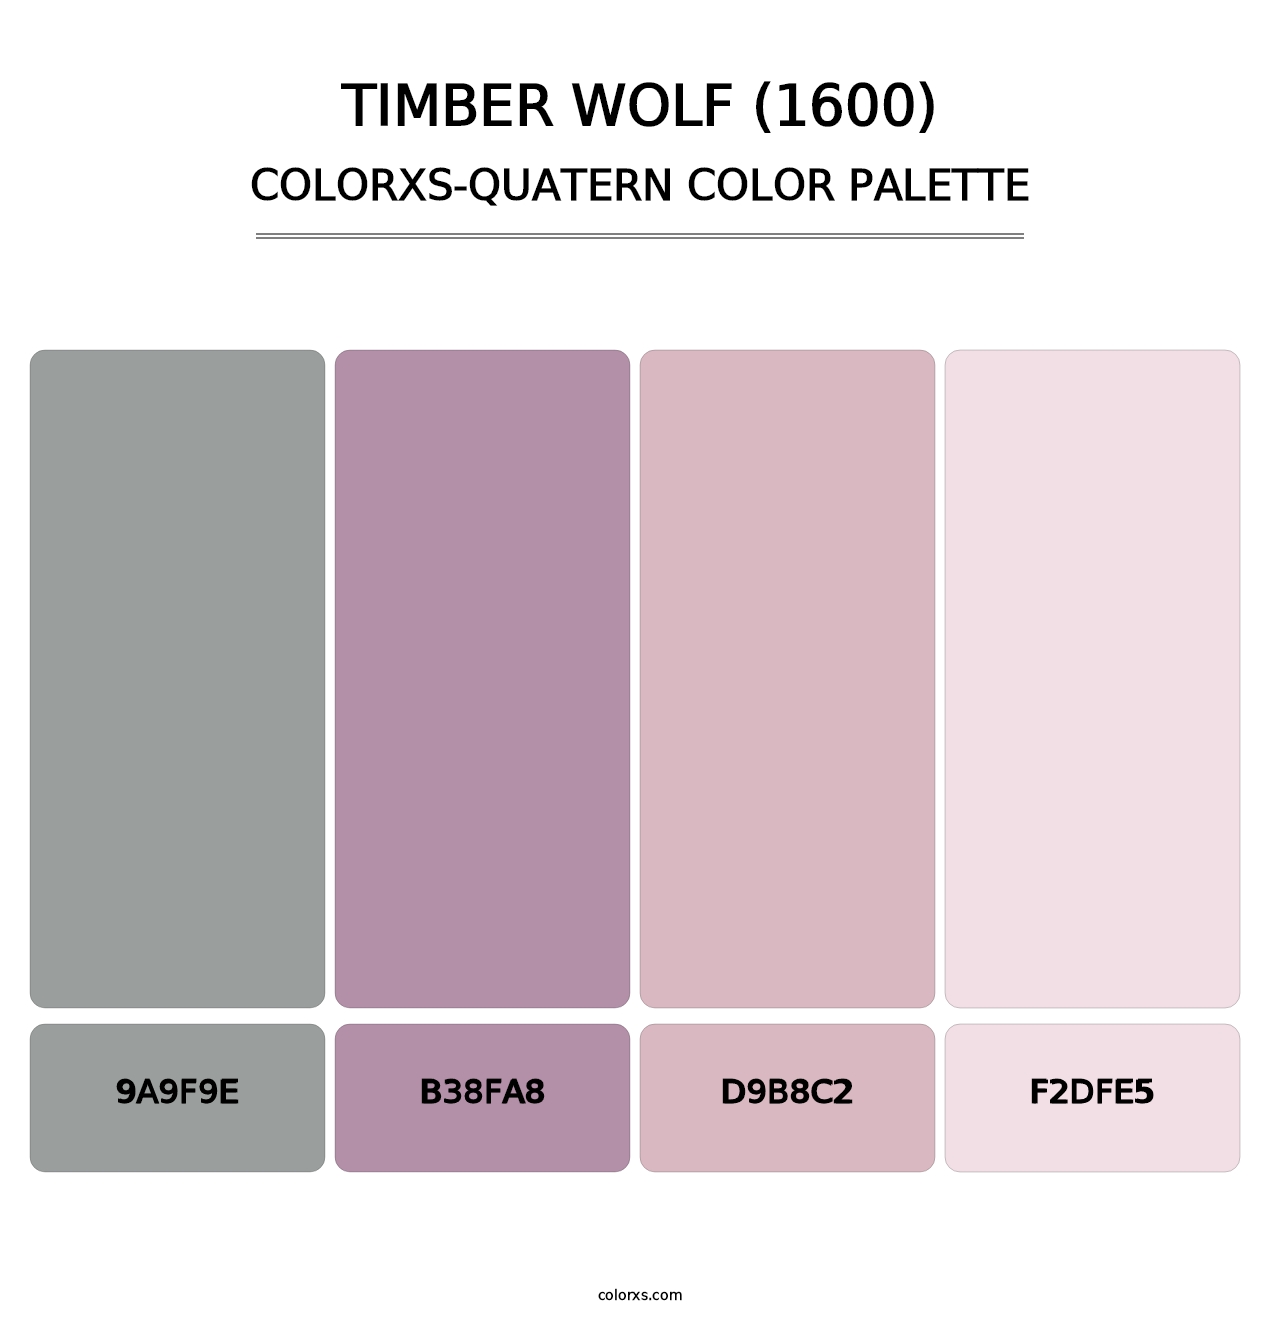 Timber Wolf (1600) - Colorxs Quatern Palette